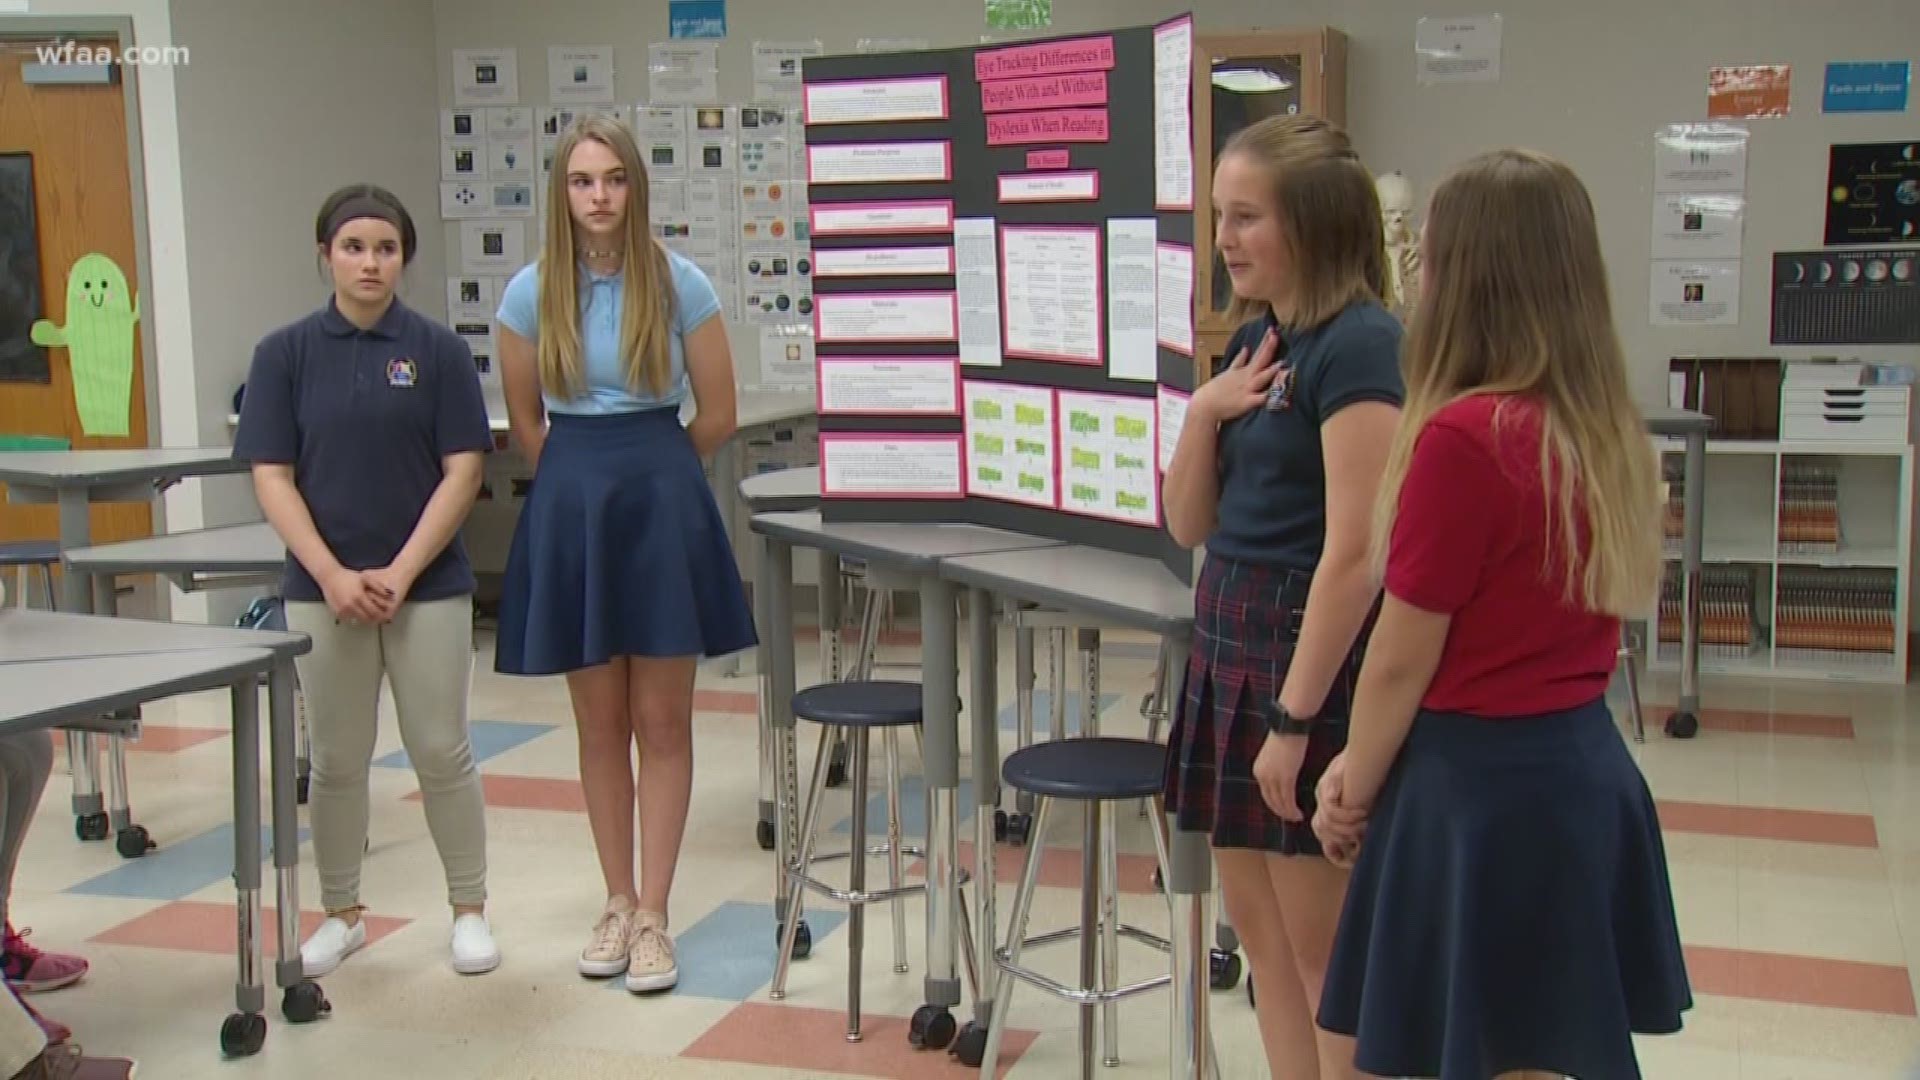 Learning to embrace dyslexia: How a science project helped make a Dallas teen more confident